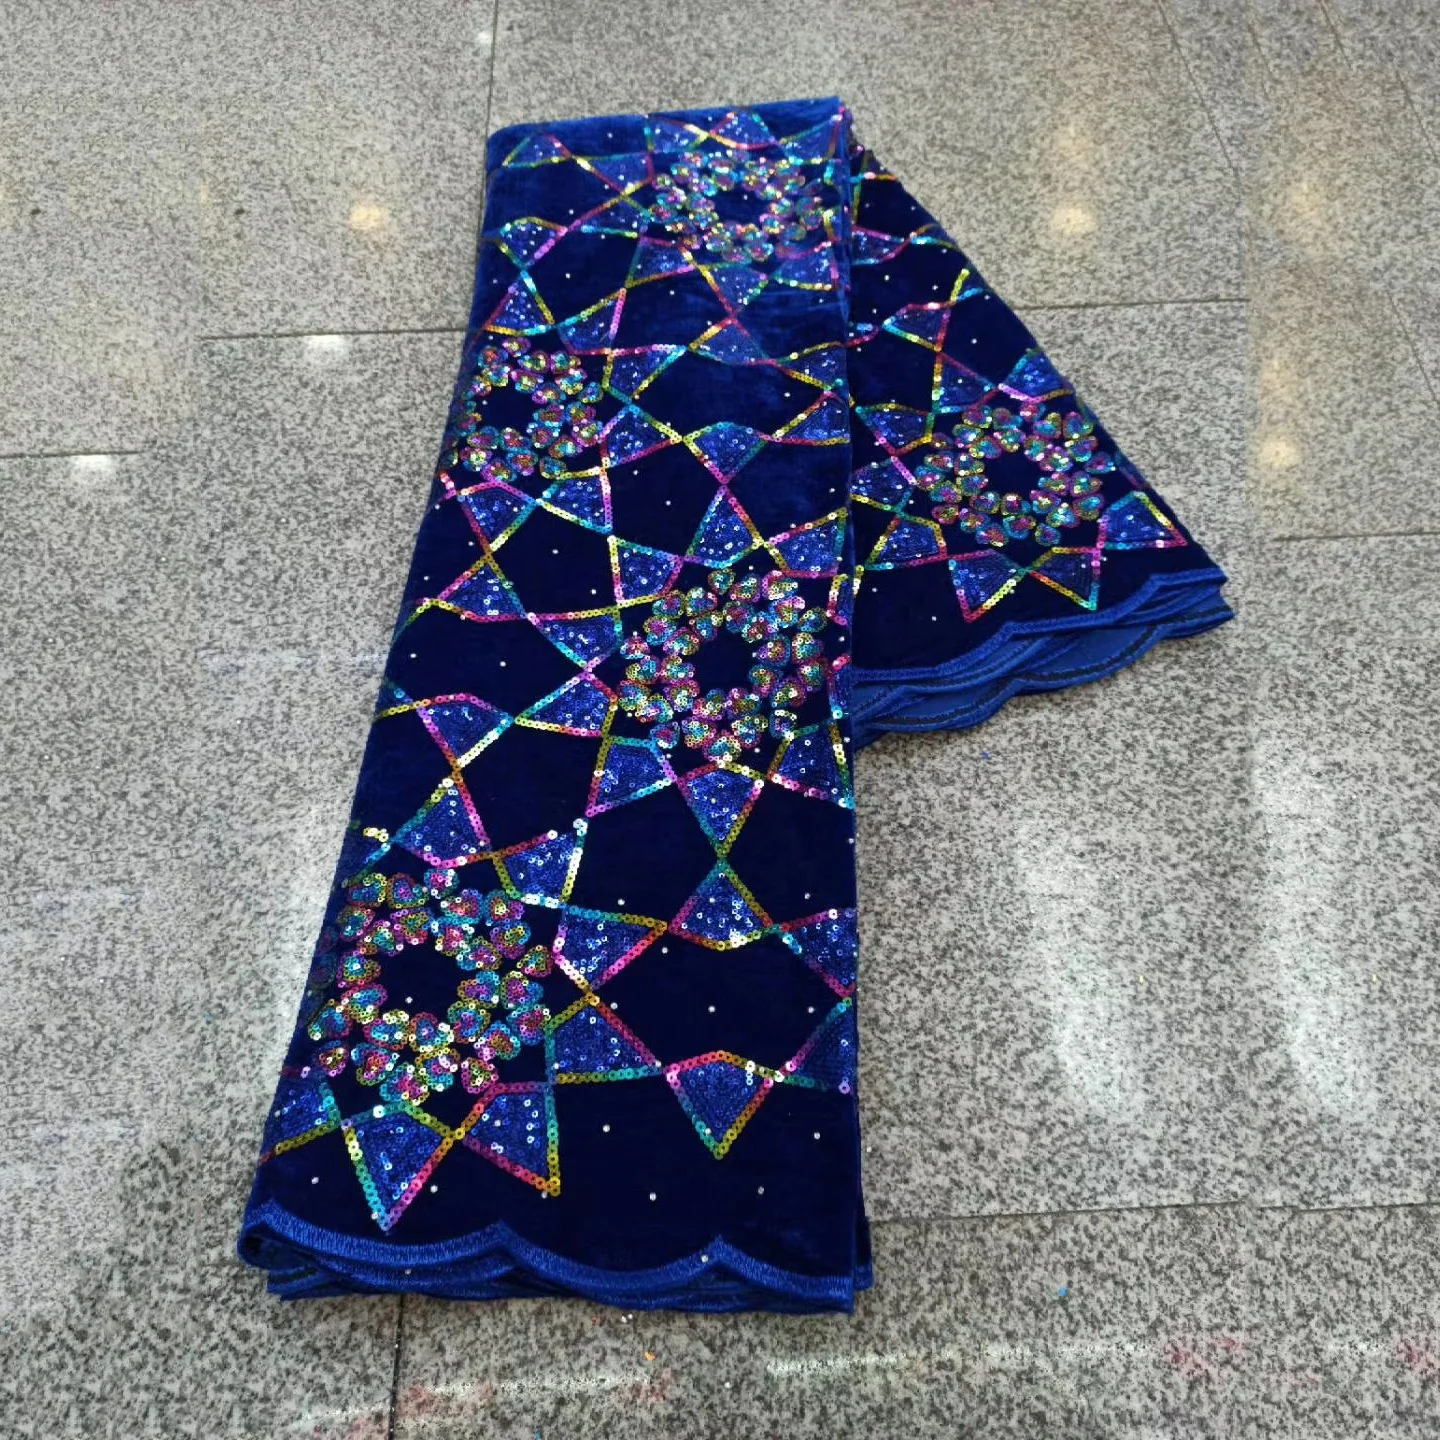 African Lace Fabric High-Quality Lace Velvet Fabric With Sequins.